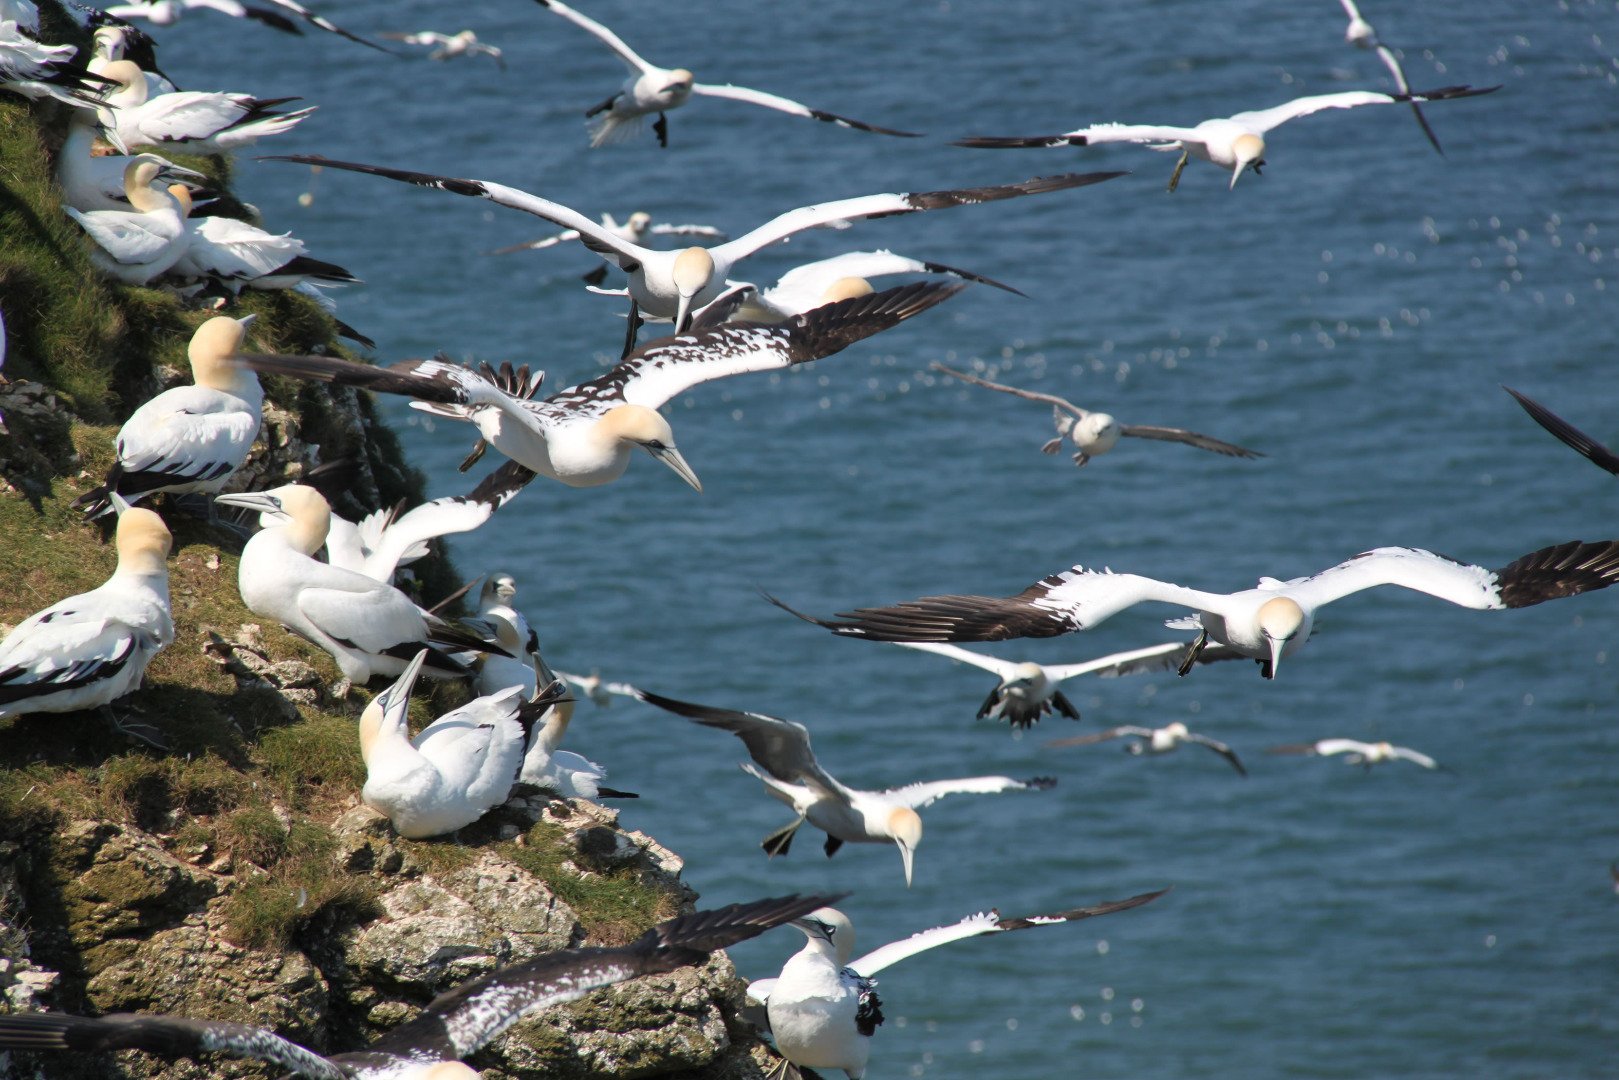 Image name gannets at bempton martin batt the 9 image from the post Yorkshire's Top 10 Natural Highlights in Yorkshire.com.